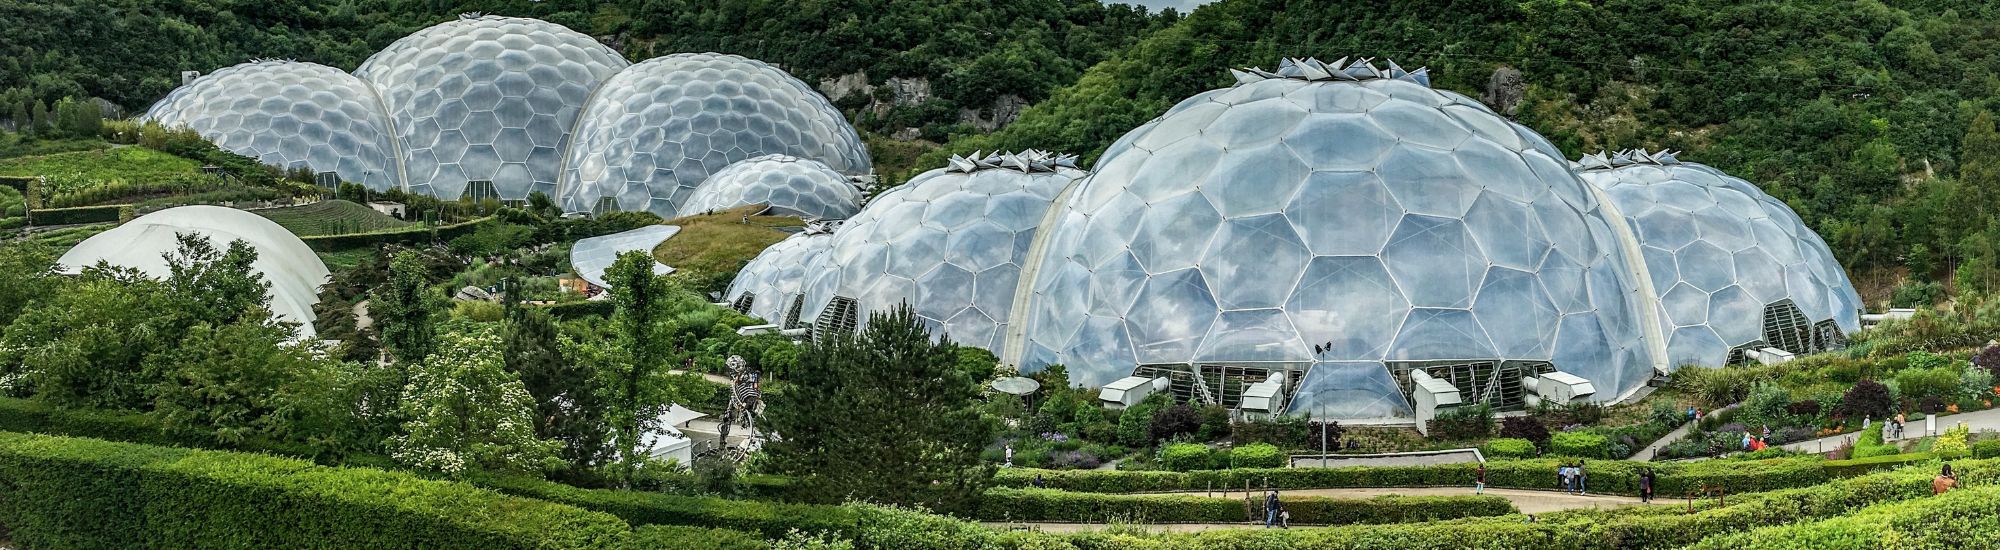 tourhub | Just Go Holidays | Newquay & the Eden Project 